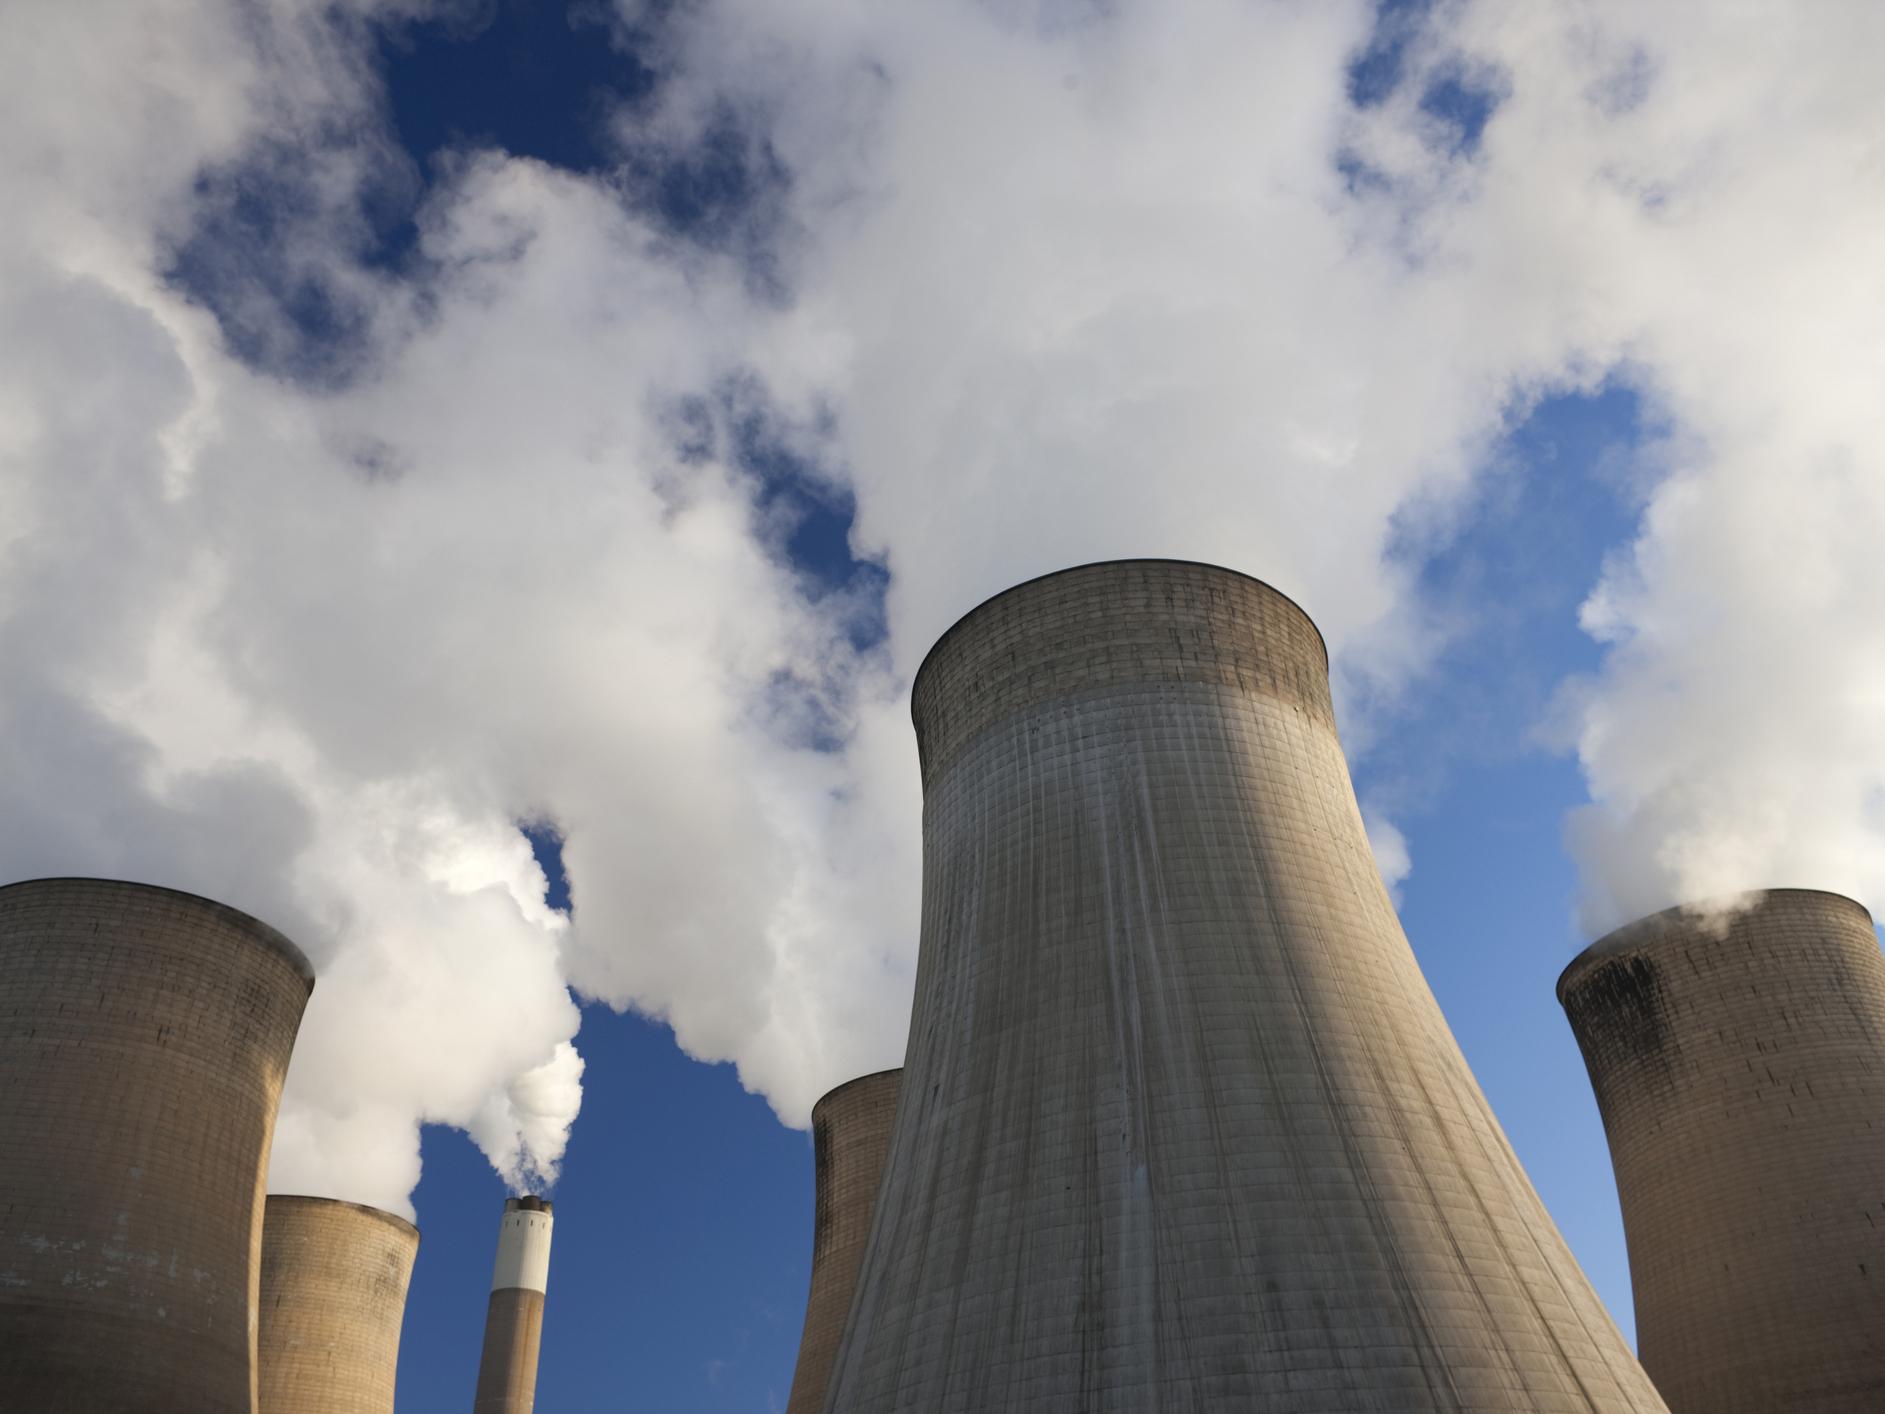 A new report states the UK must set new targets to ensure greenhouse gas emissions are balanced by the removal of greenhouse gases from the atmosphere